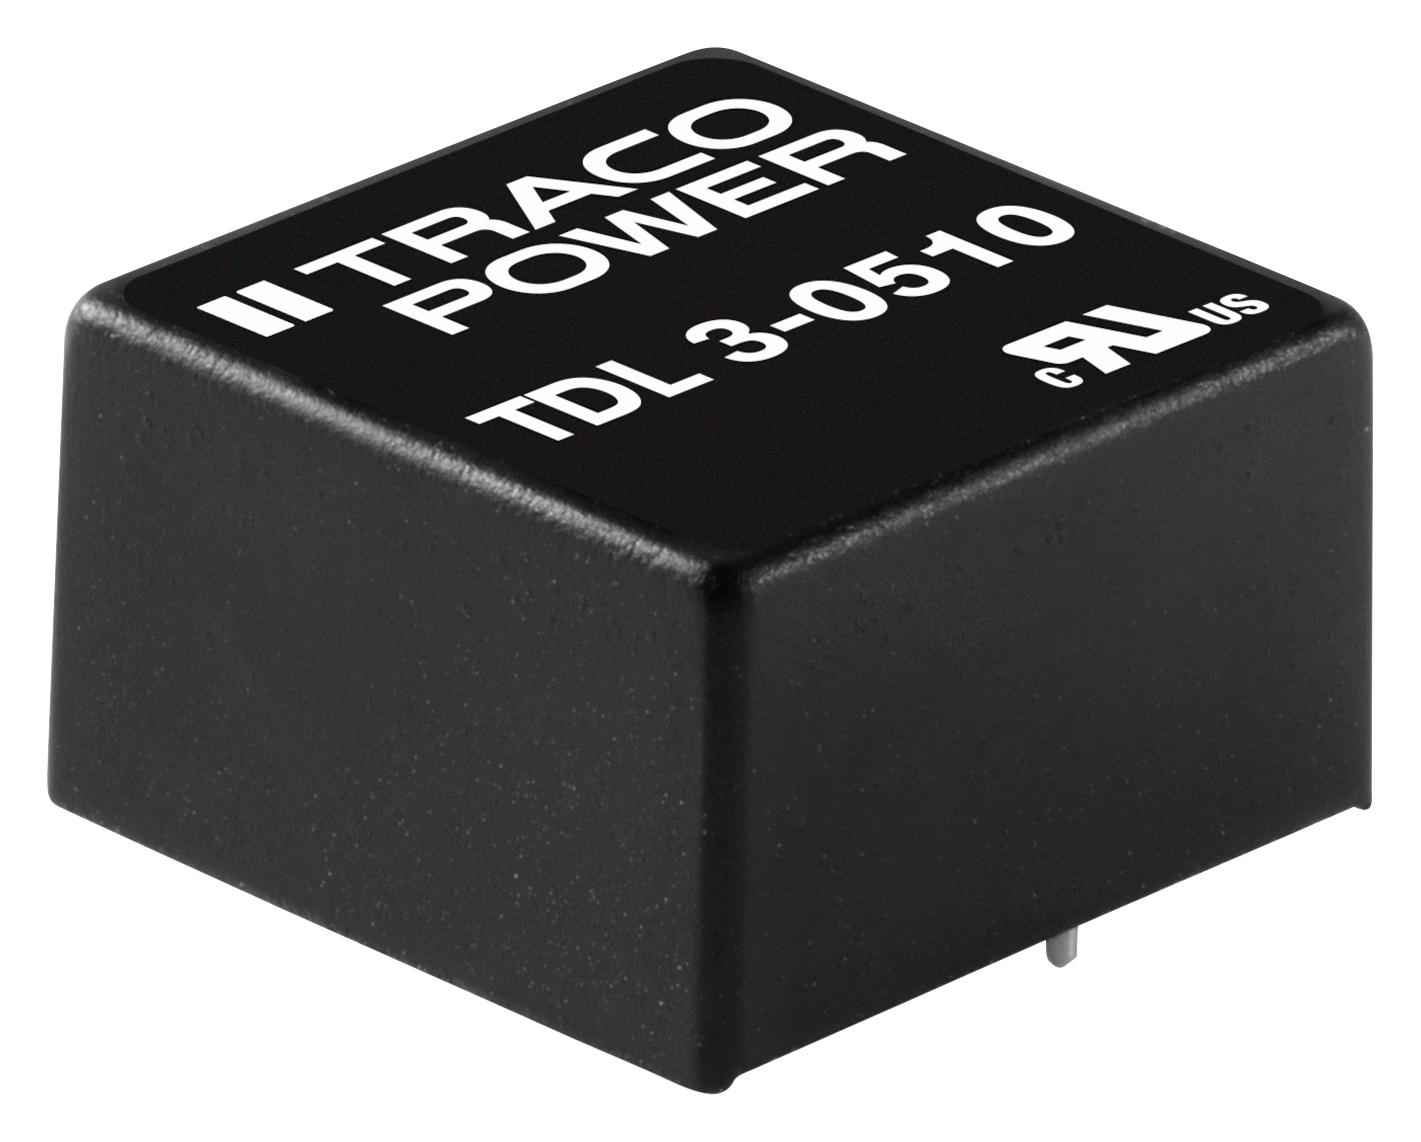 TDL 3-4821 DC-DC CONVERTER, 2 O/P, 3W TRACO POWER